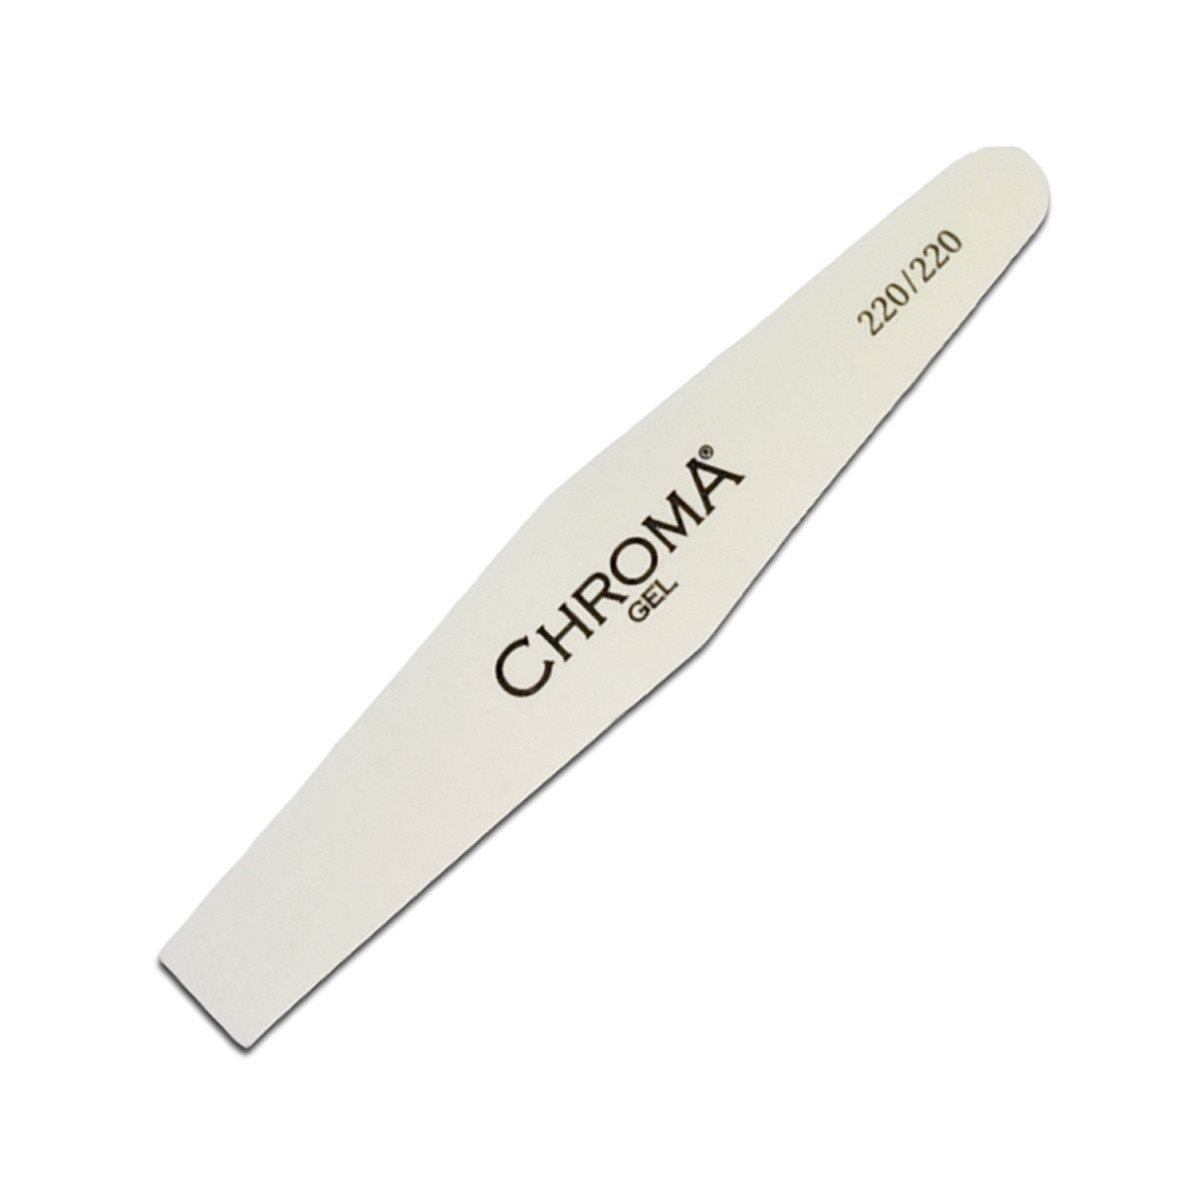 Nail File 220/220 Grit - Professional-Grade Double-Sided Tool for Perfect Nails - beautyhair.co.ukChroma Gel